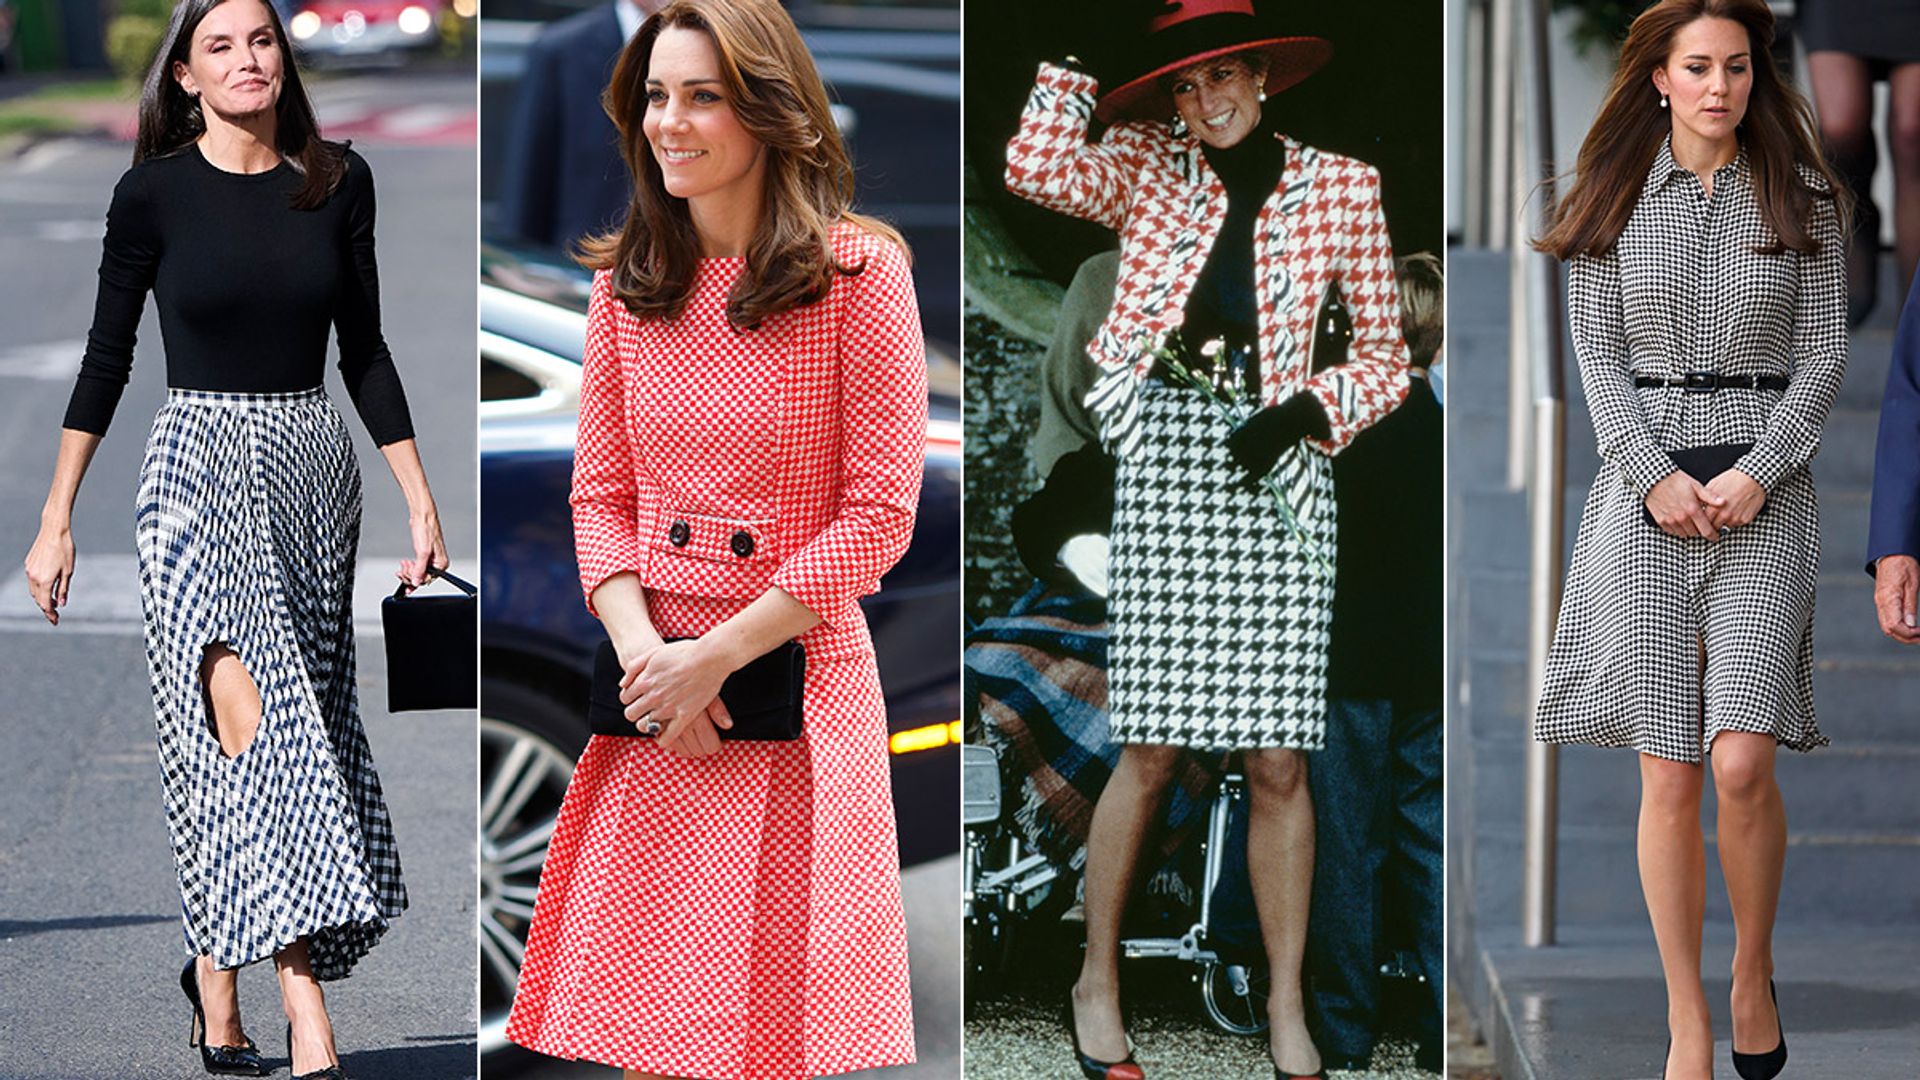 Royals in gorgeous gingham: Princess Kate, Princess Beatrice and more